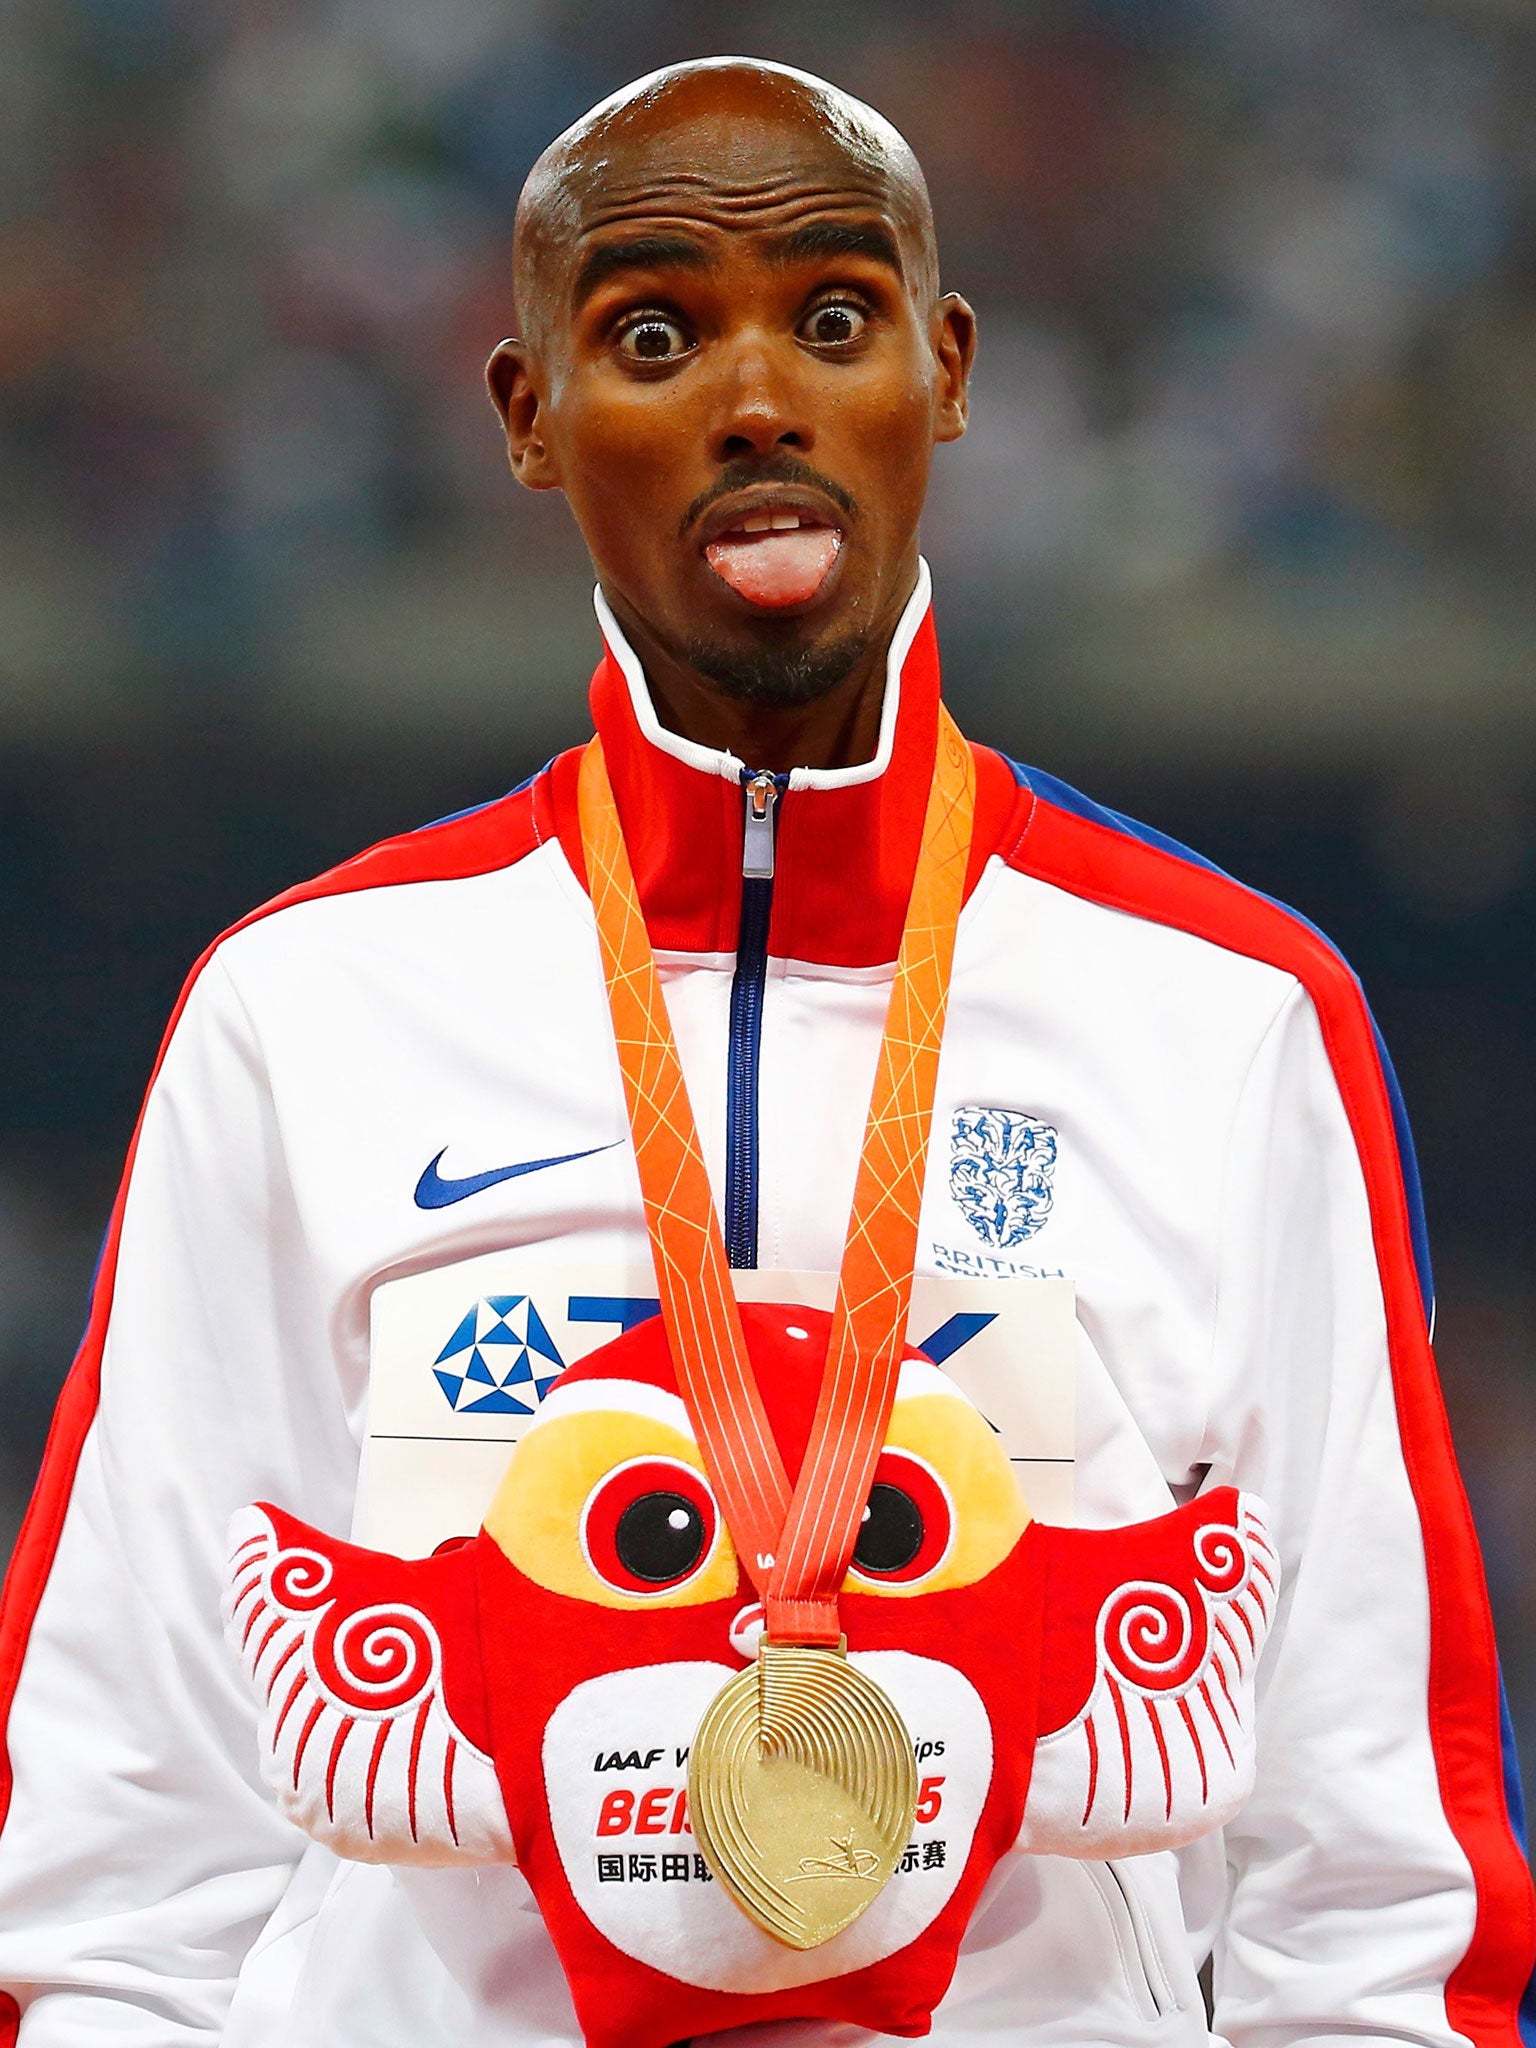 According to Brendan Foster, Mo Farah, pictured, is the greatest ever British sports person